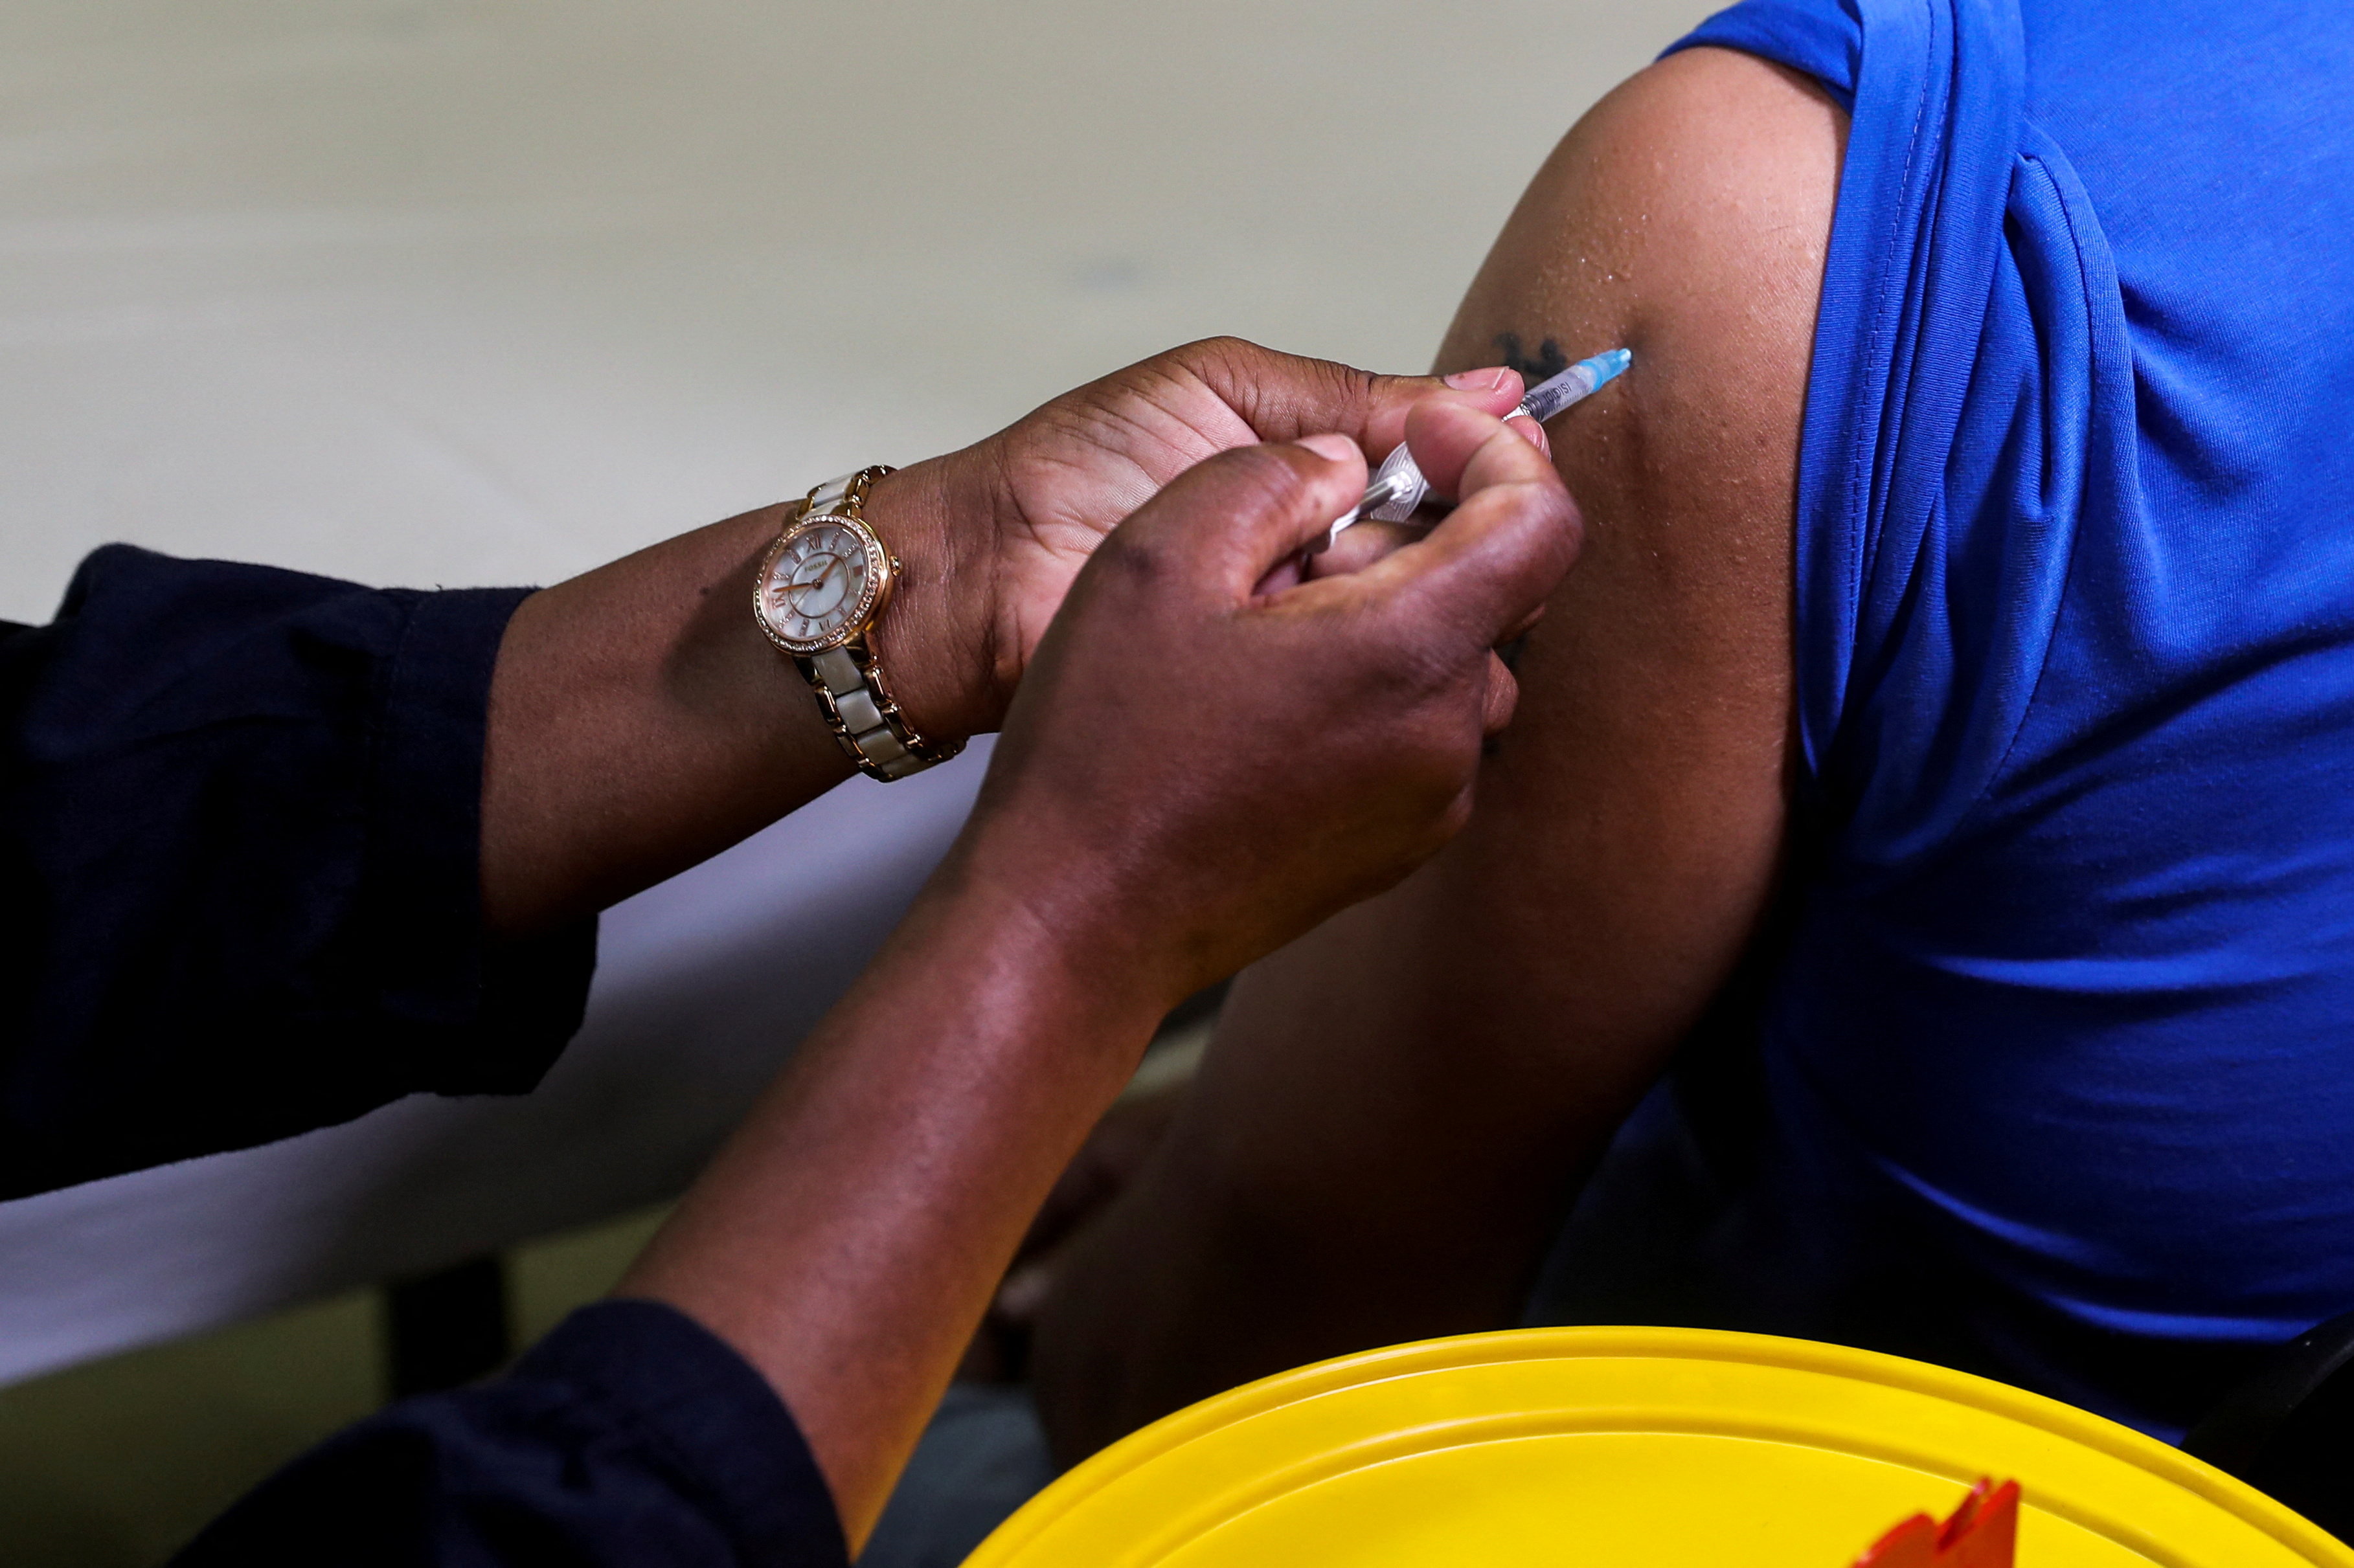 A healthcare worker administers the  Pfizer coronavirus disease (COVID-19) vaccine to a man, amidst the spread of the SARS-CoV-2 variant Omicron, in Johannesburg